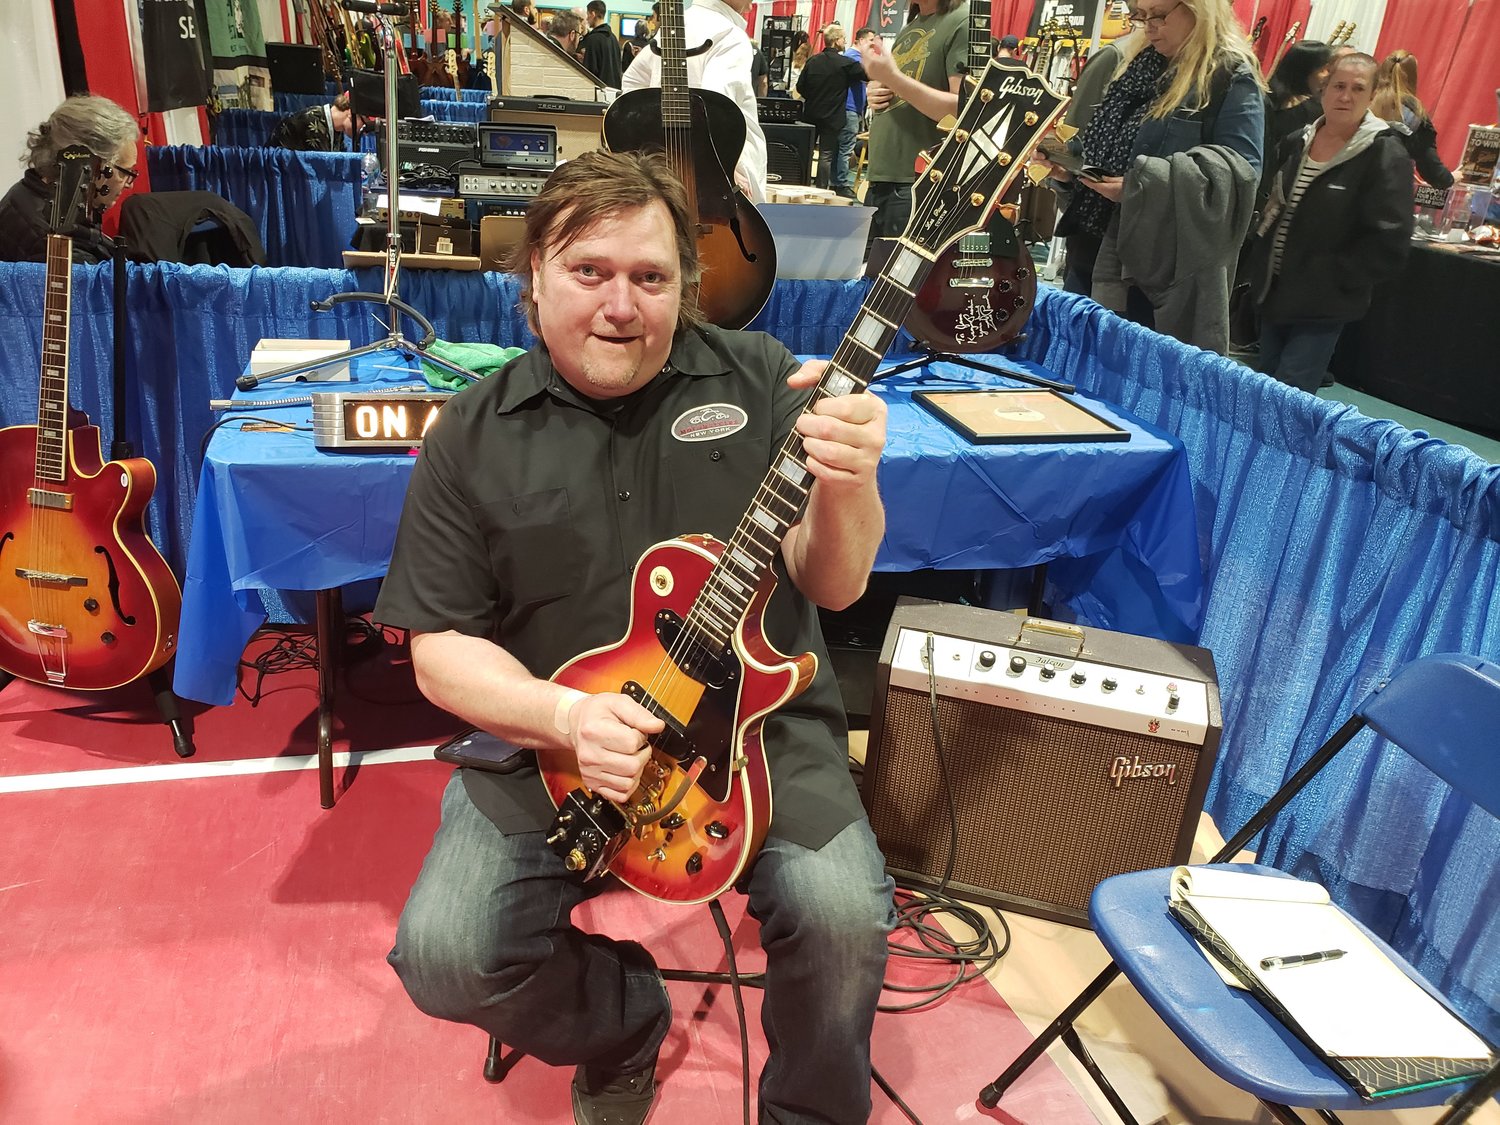 Kevin Goode, of Babylon, played one of the Les Pauls on display.